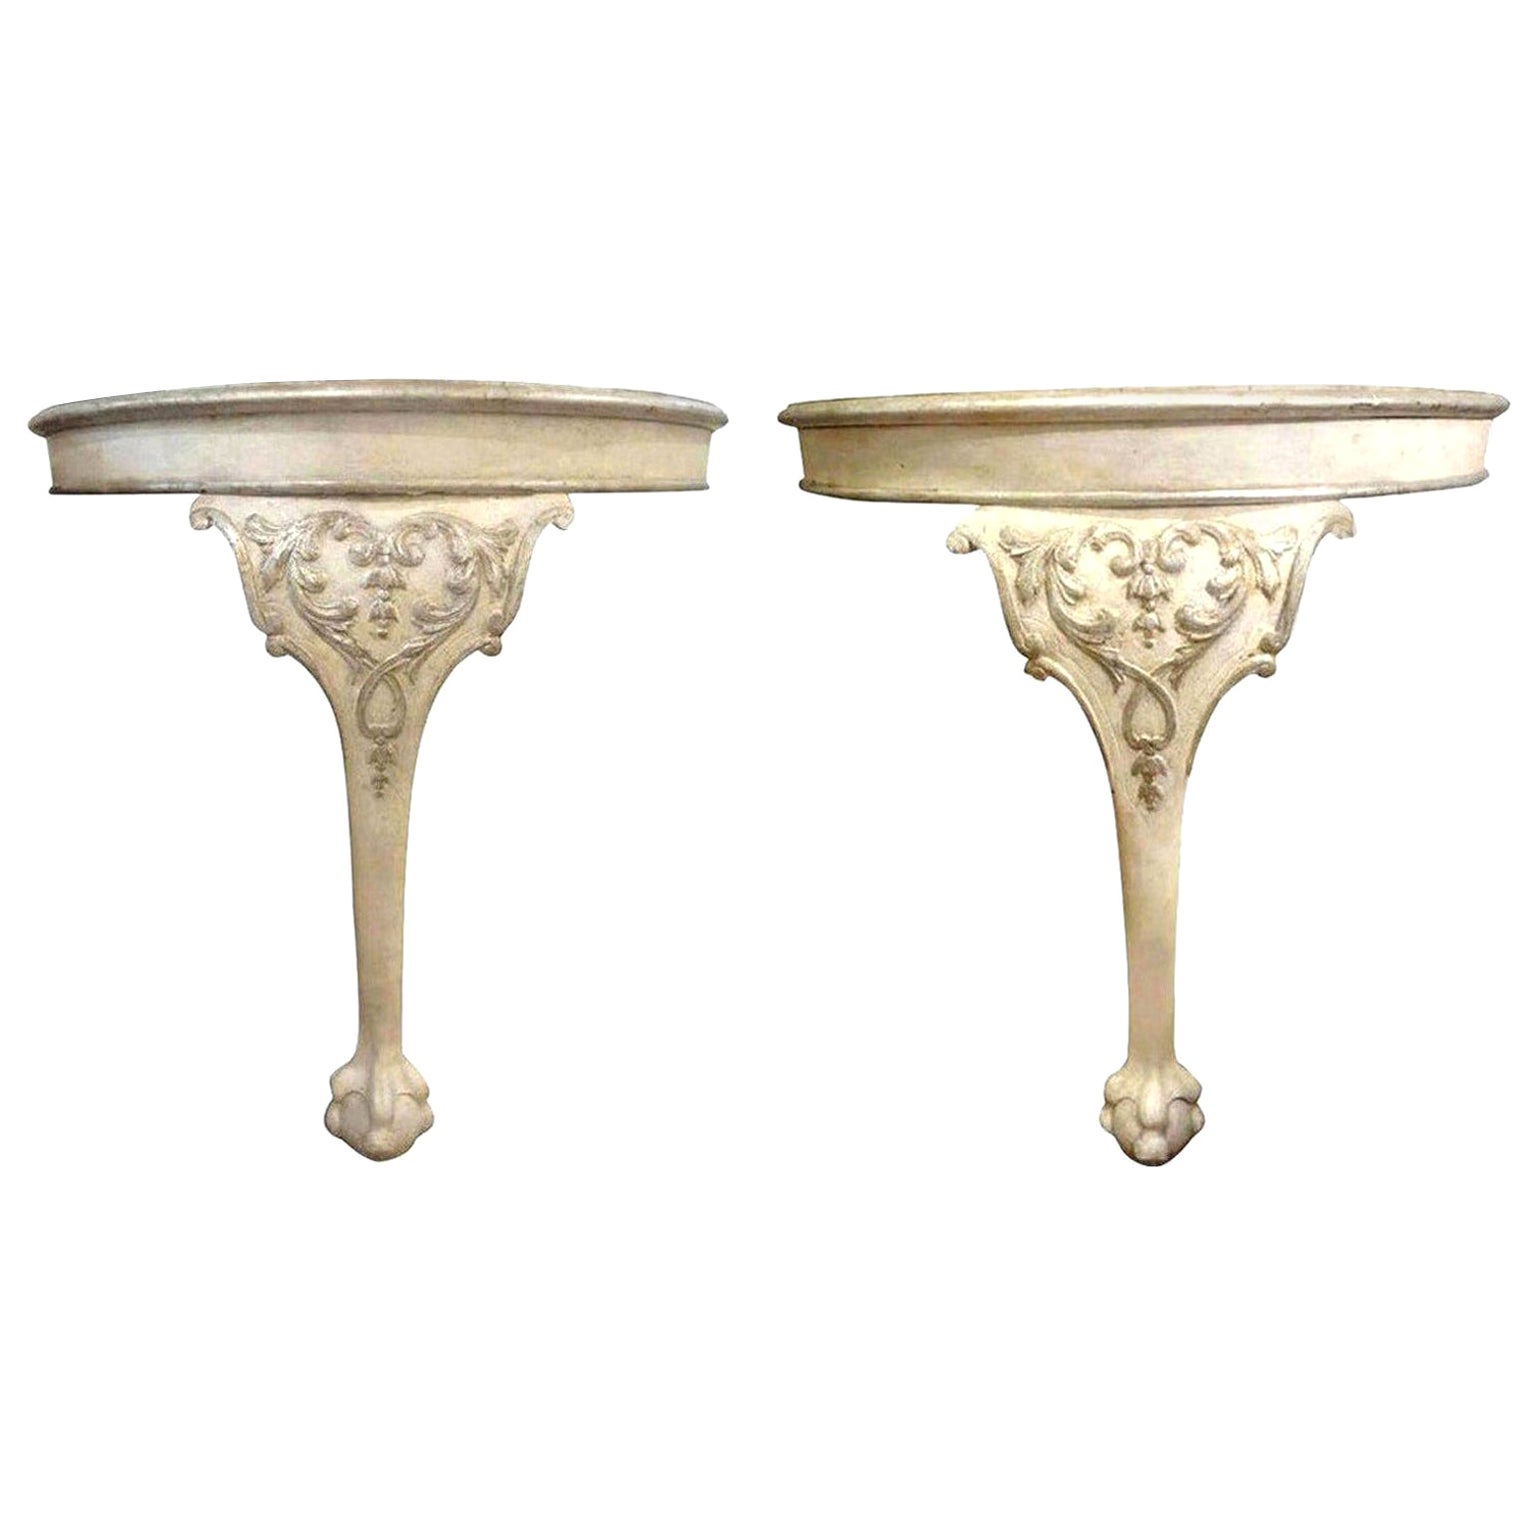 Pair of Italian Console Tables Painted and Silver Gilt